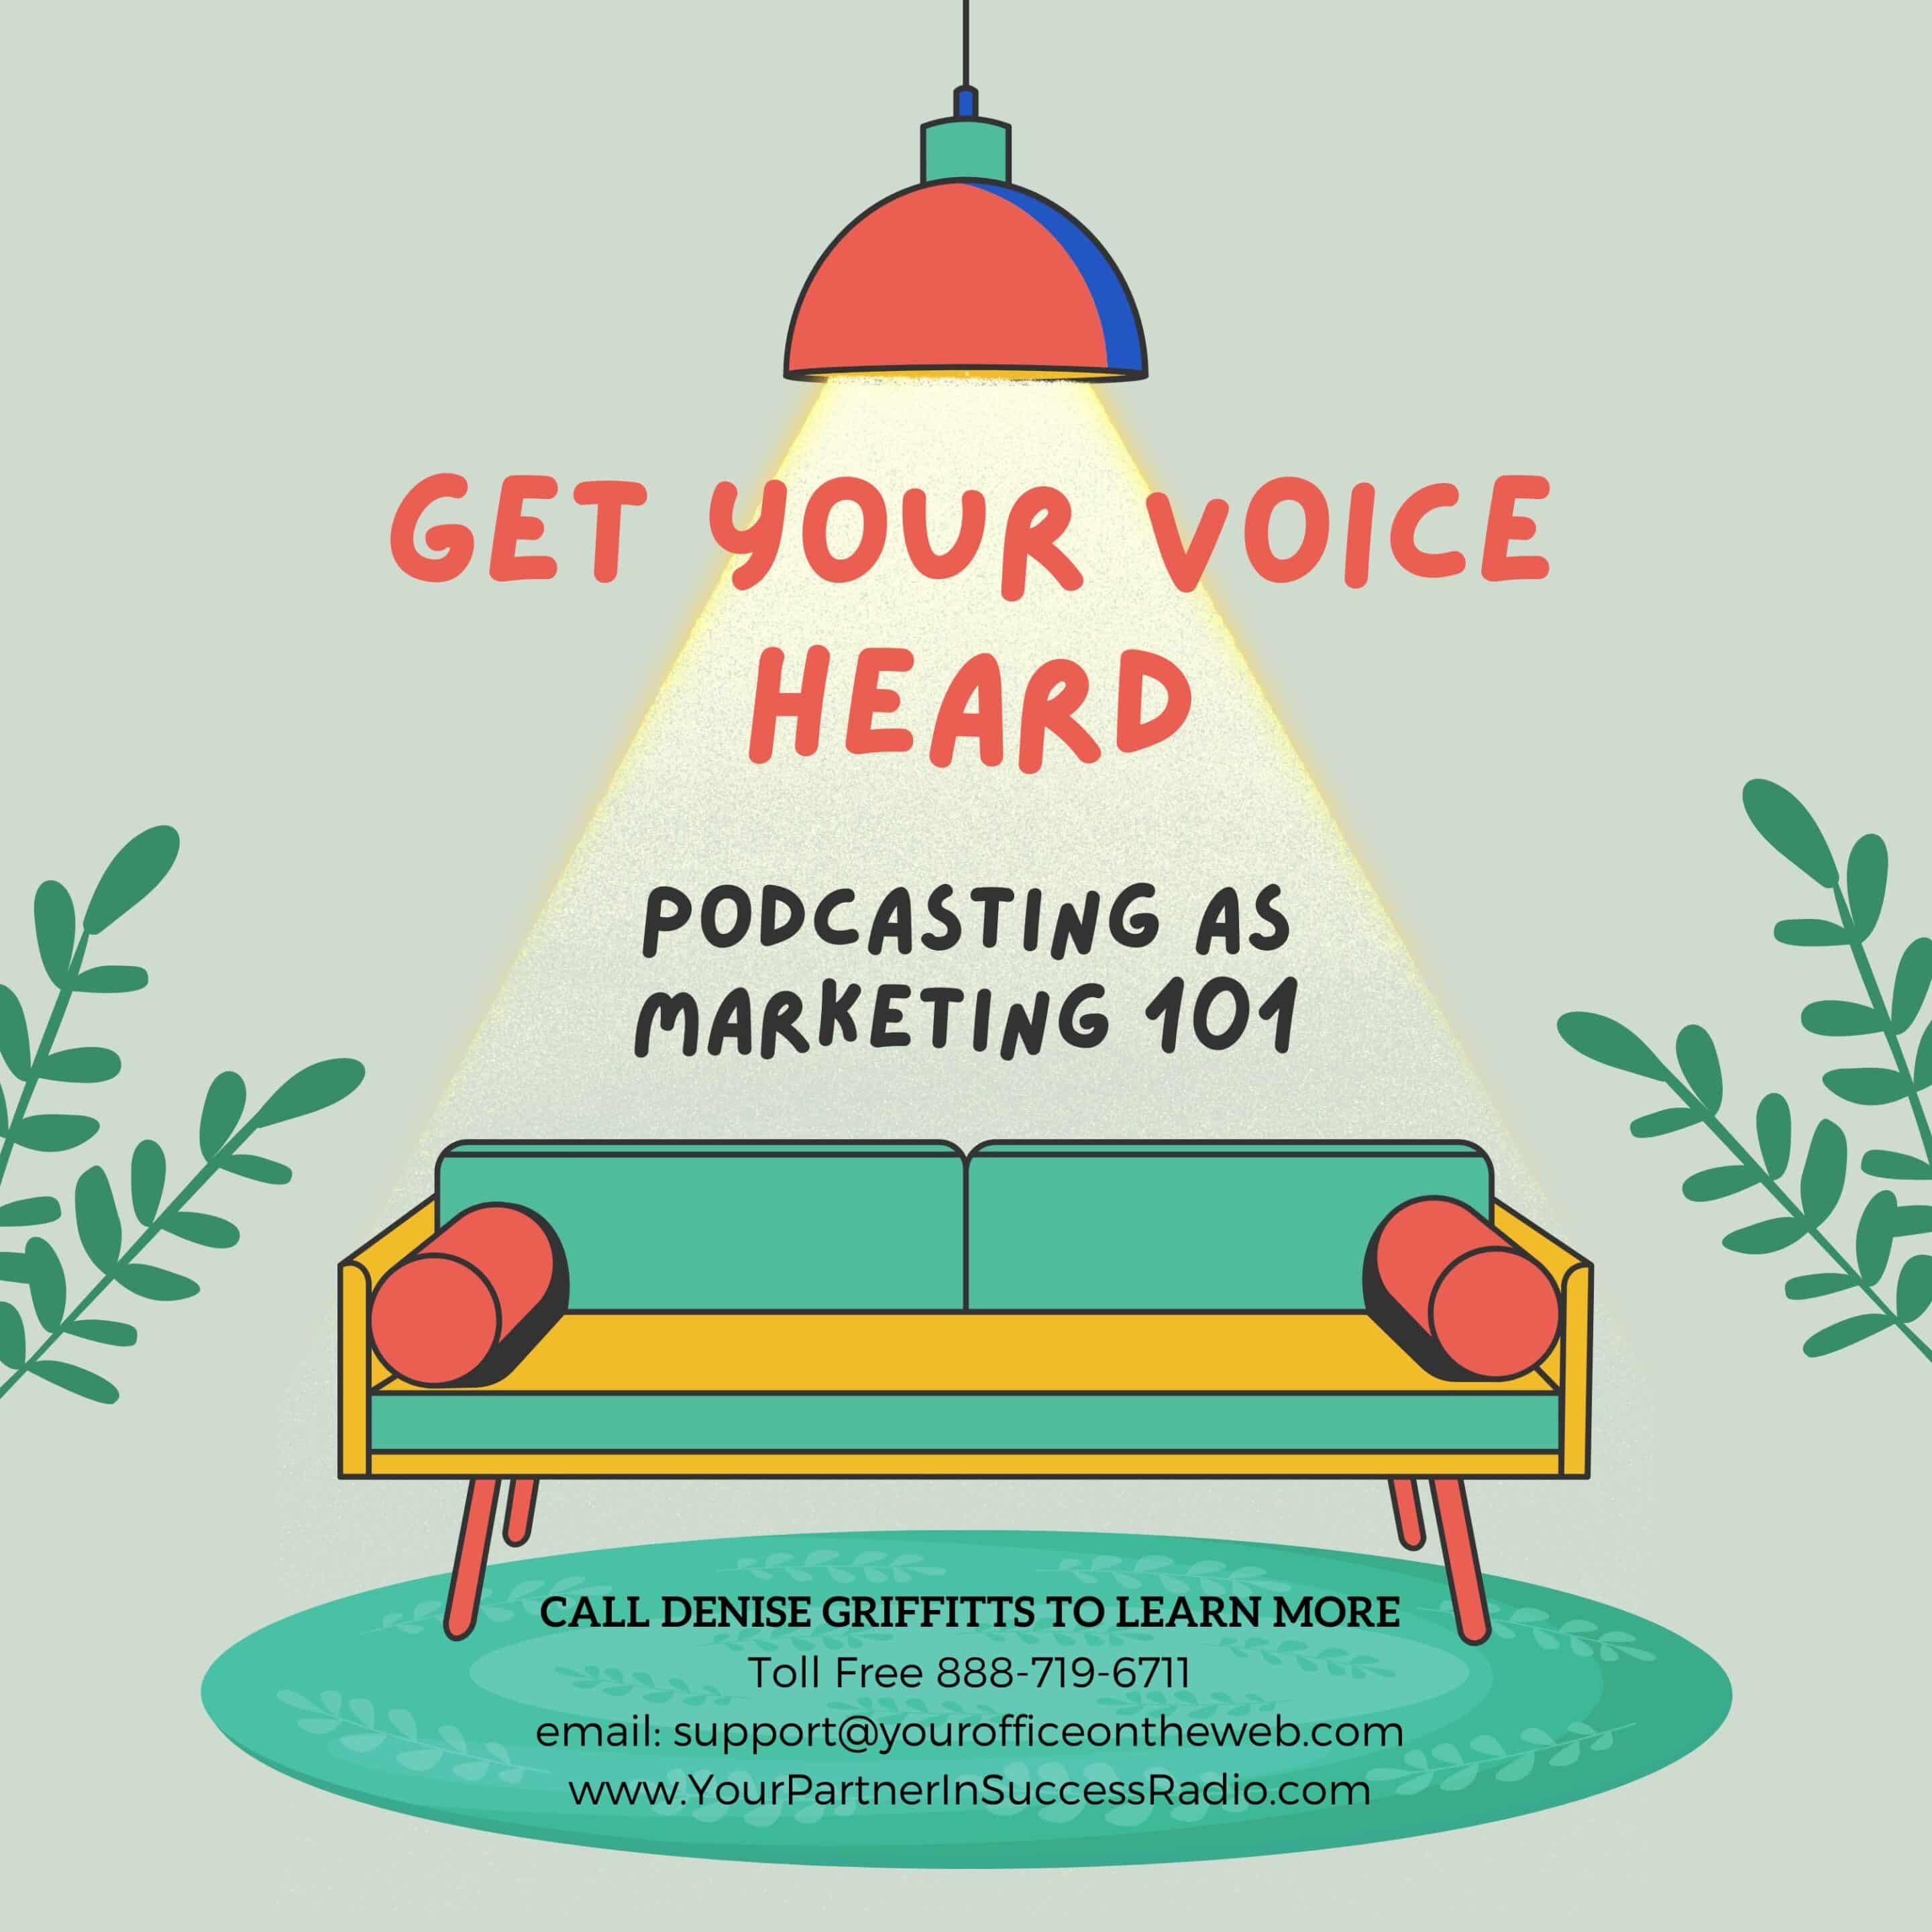 GET YOUR VOICE HEARD - Podcasting As Marketing 101